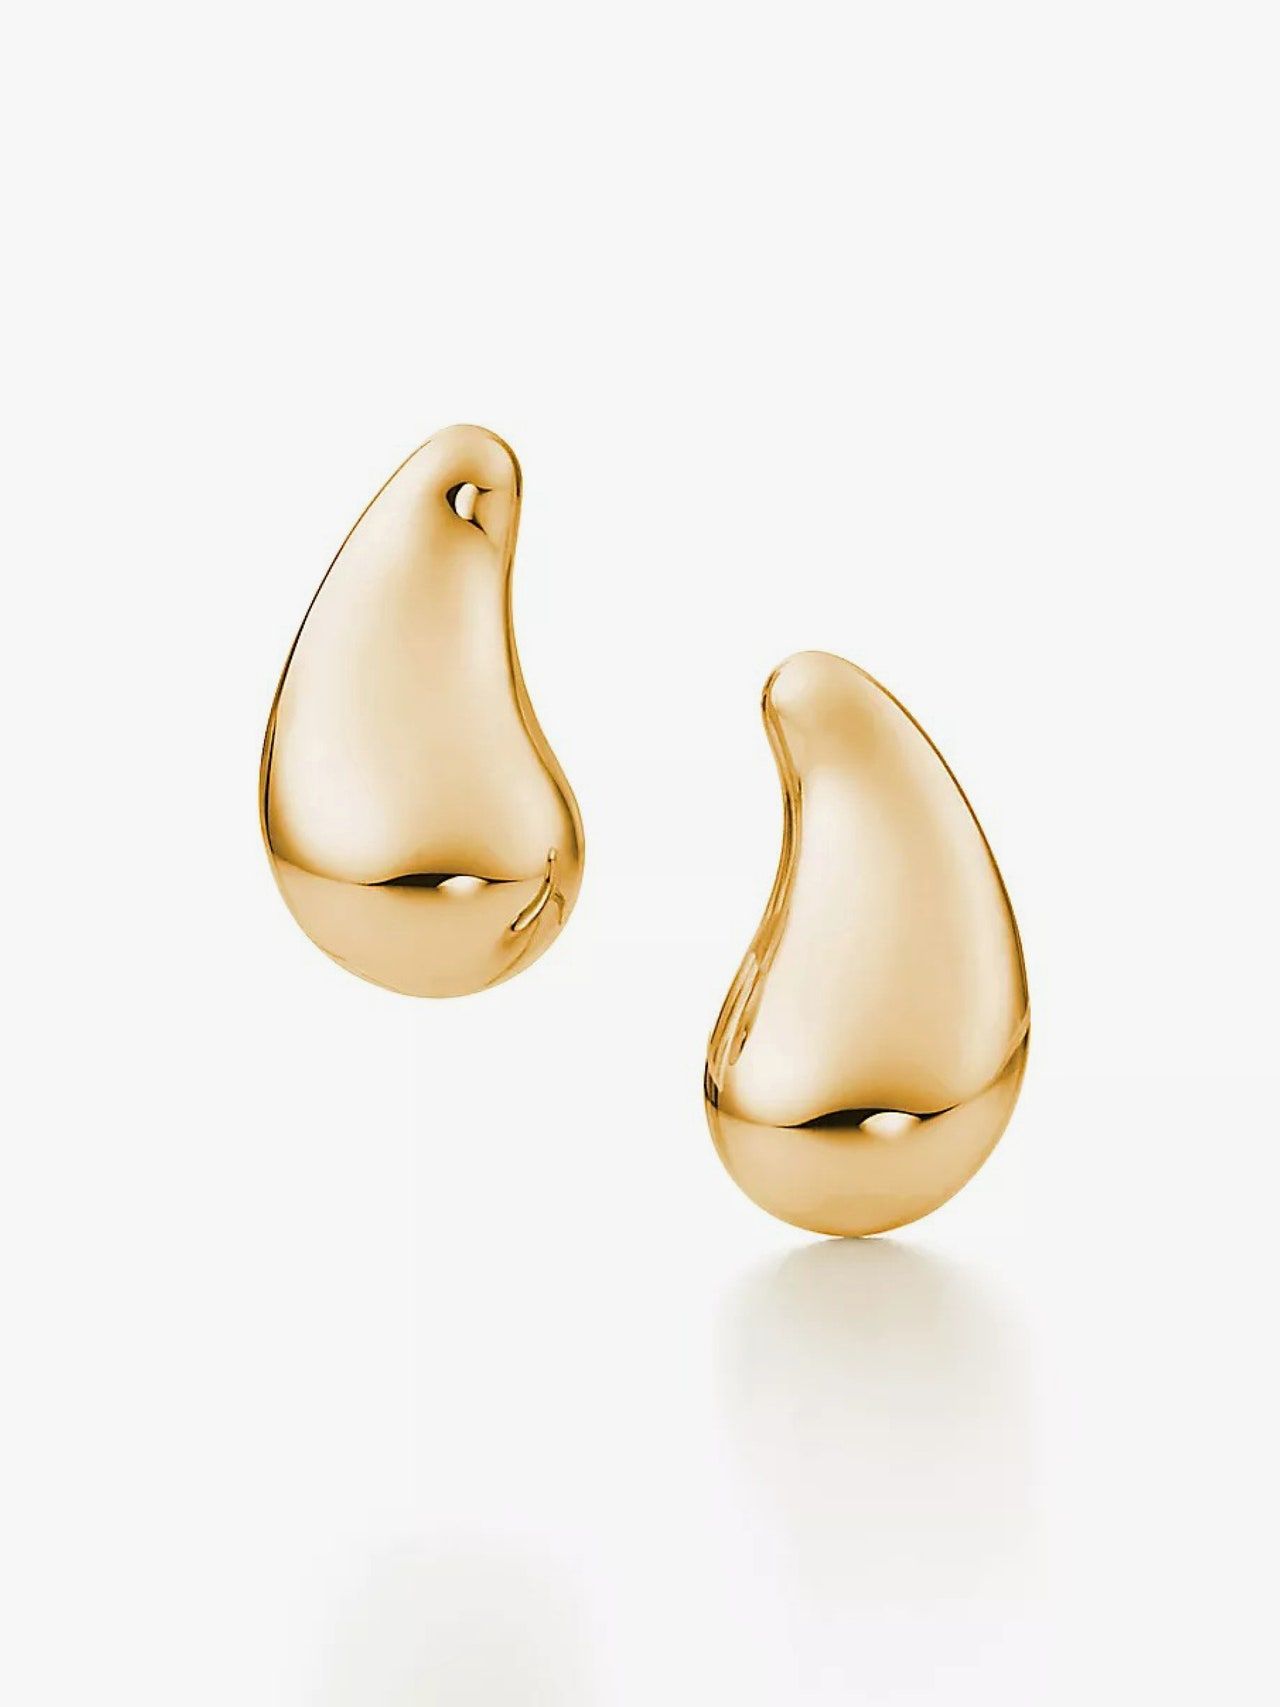 Look elegant and unique with Earring gold